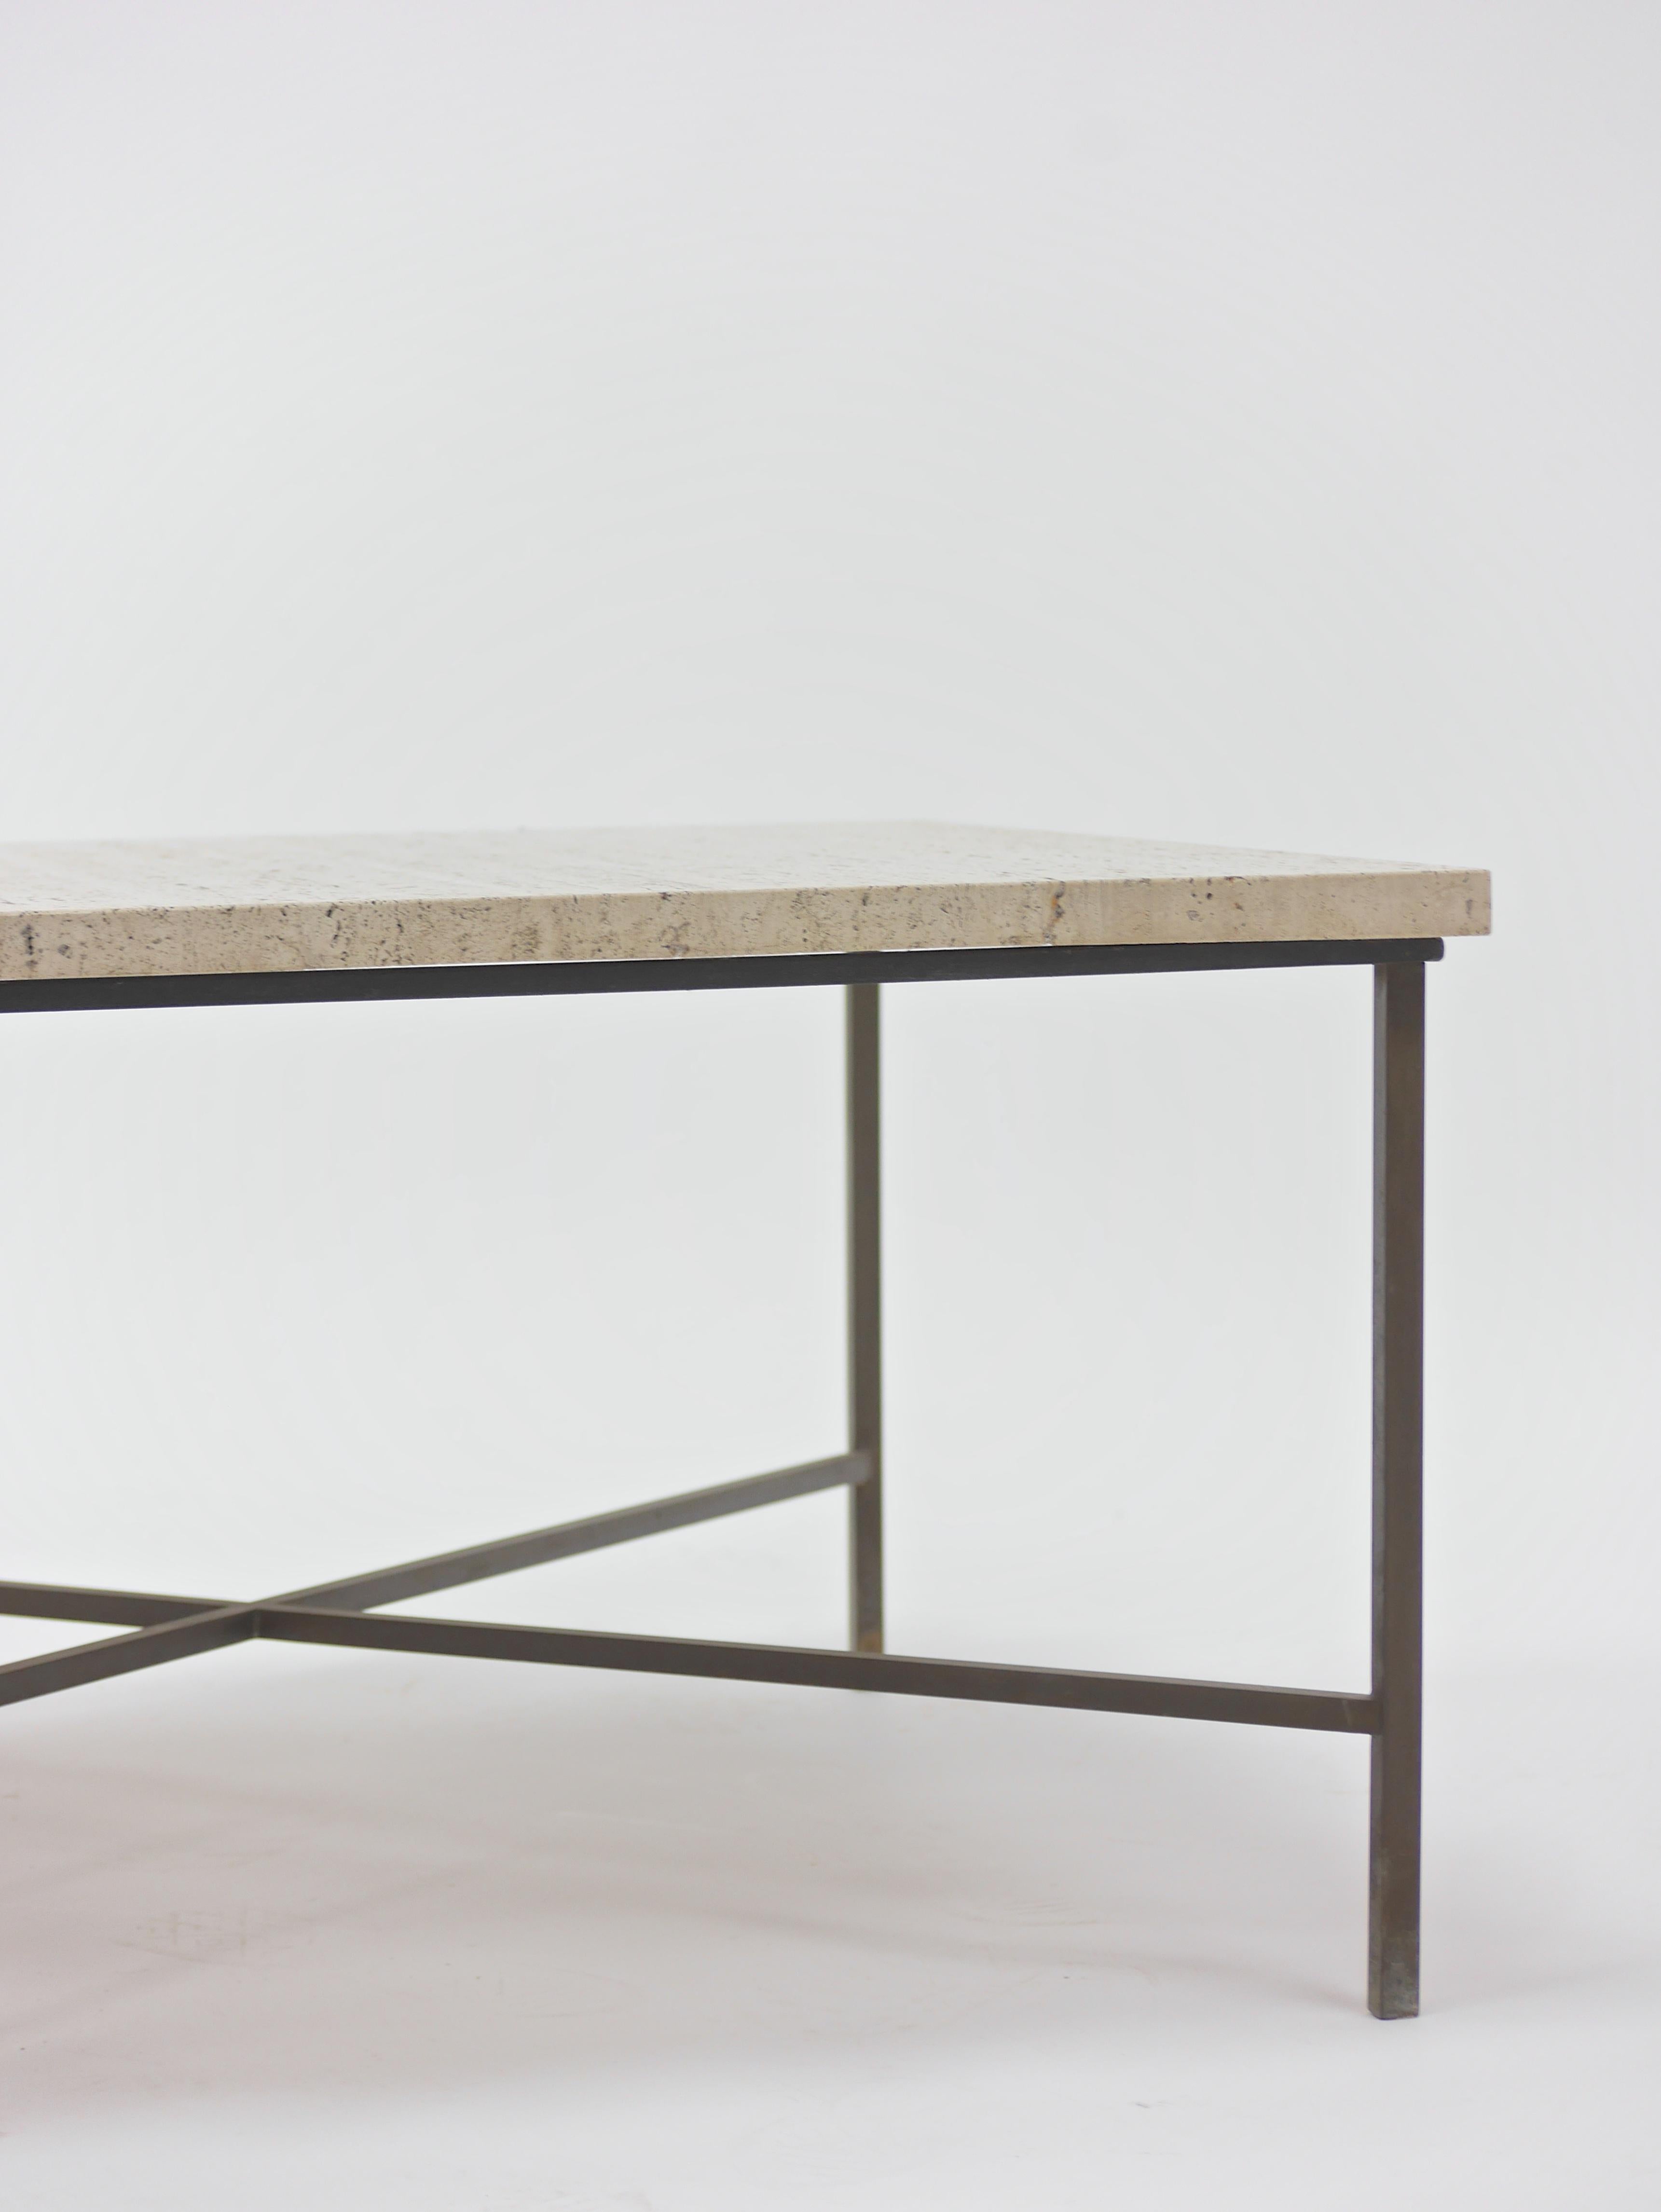 Bronze and travertine table by Harvey Probber. Solid bronze frame with a nice original Verde Gris patina.